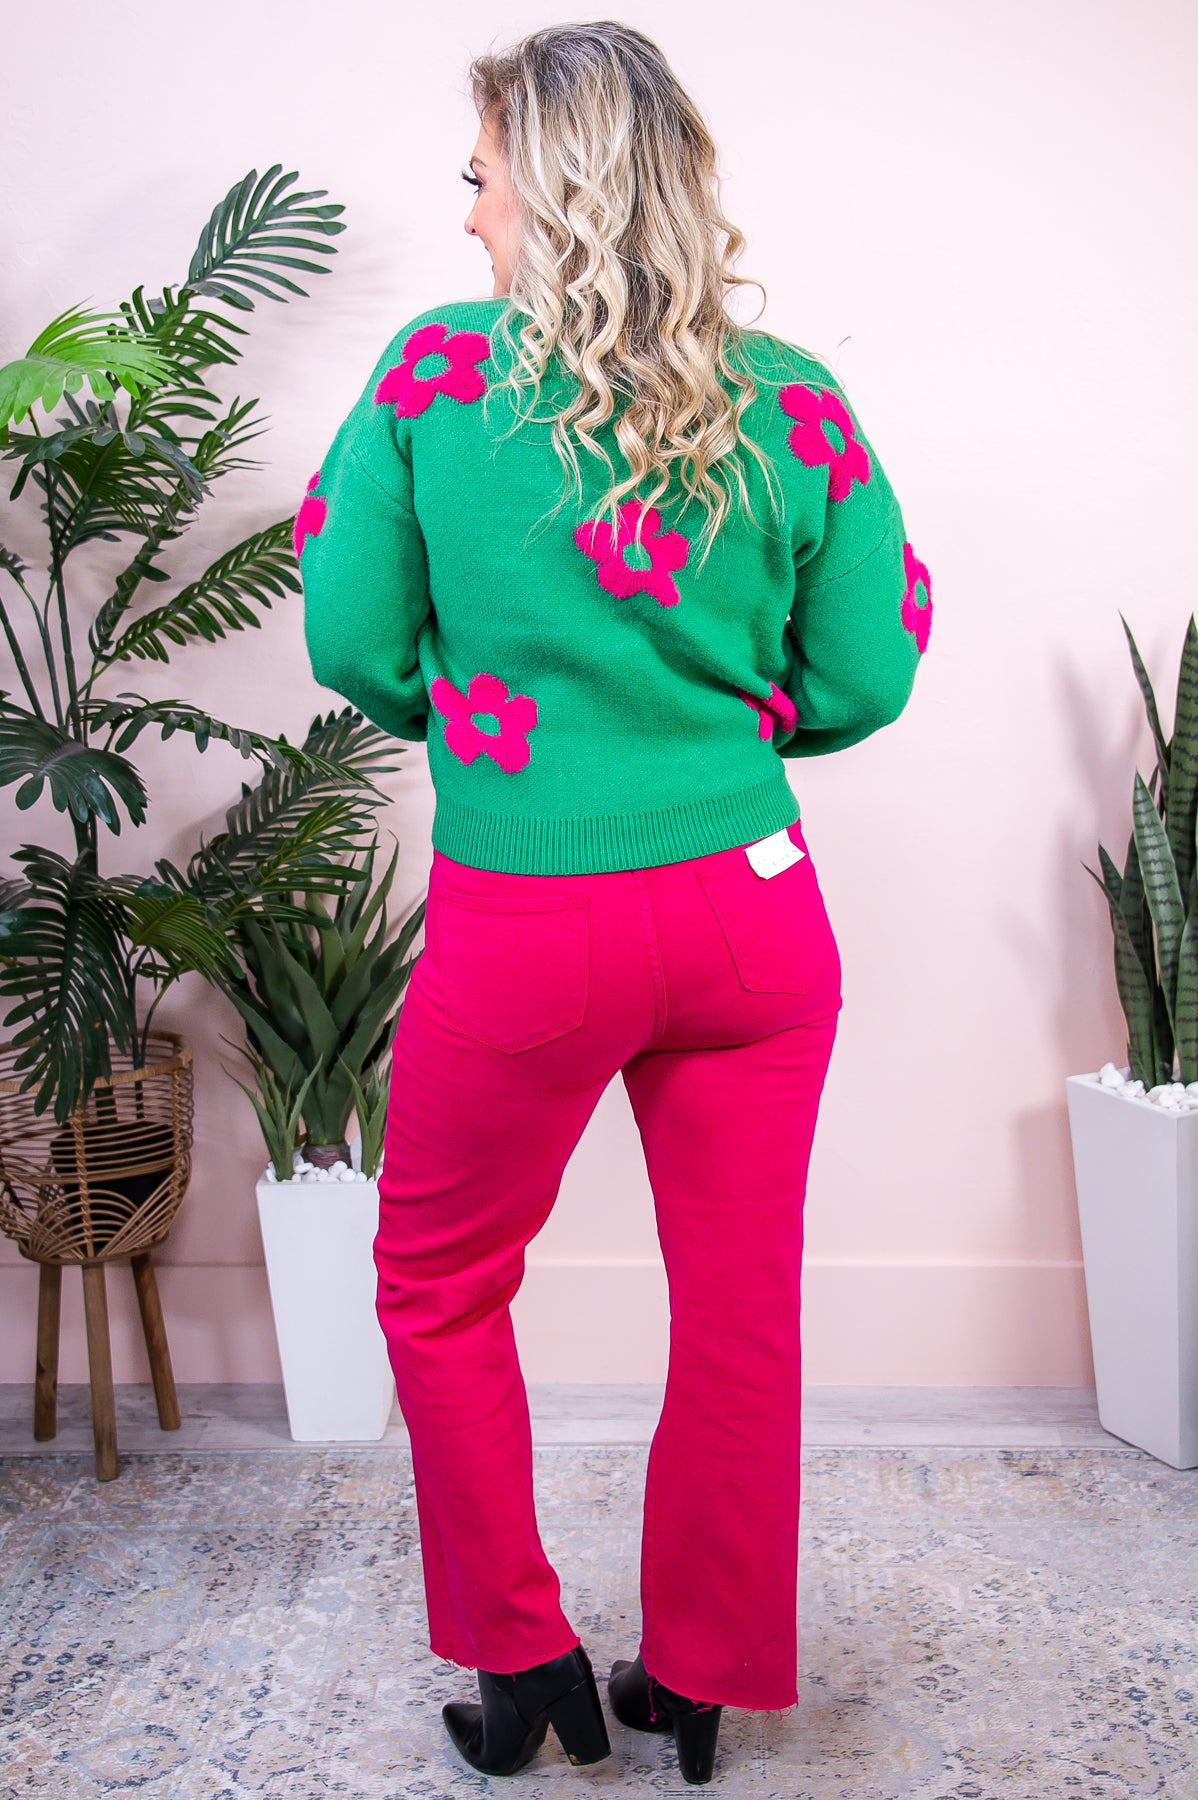 Cozy Reputation Jade/Fuchsia Floral Knitted Sweater Top - T9087JD